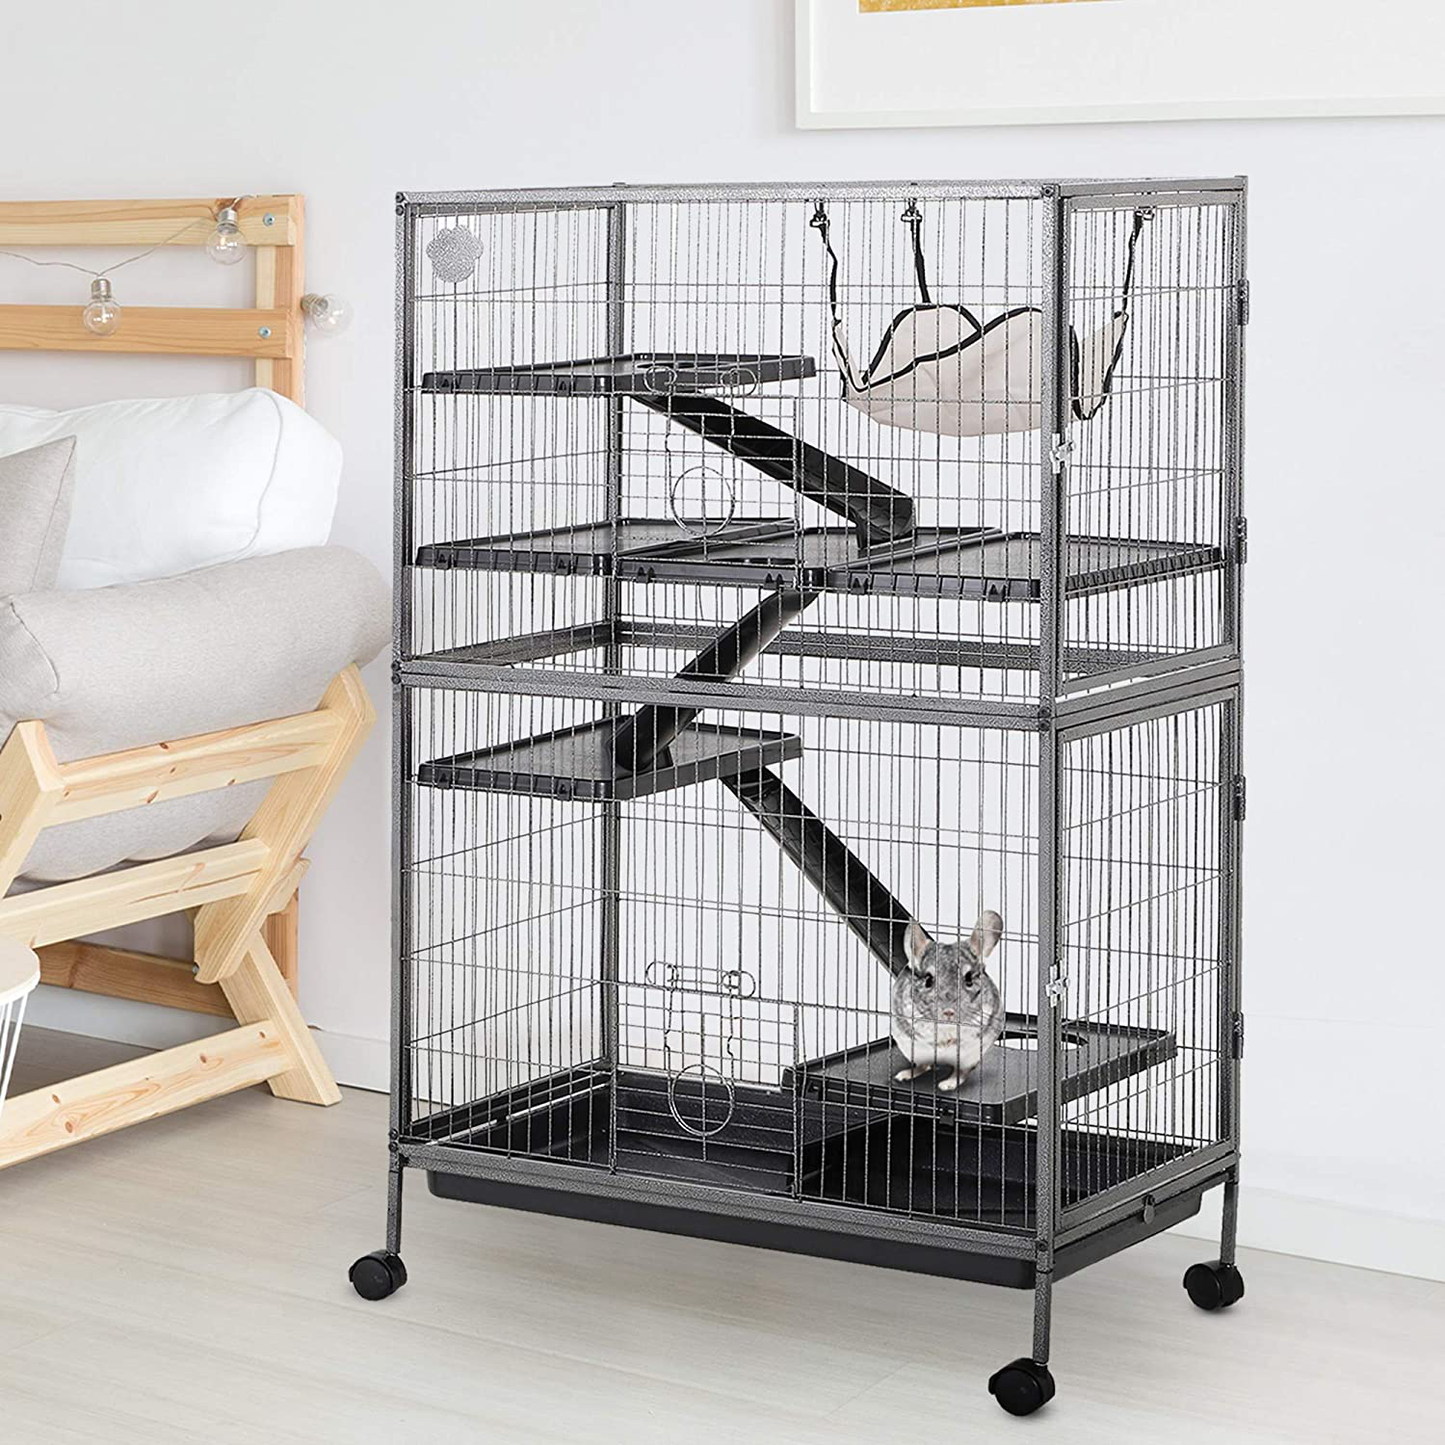 Pawhut 50" H 4 Tier Steel Plastic Small Animal Pet Cage Kit for Little Rabbit Guinea Pig Ferret with Wheels Brakes Hammock Removable Tray - Silver Grey Hammertone